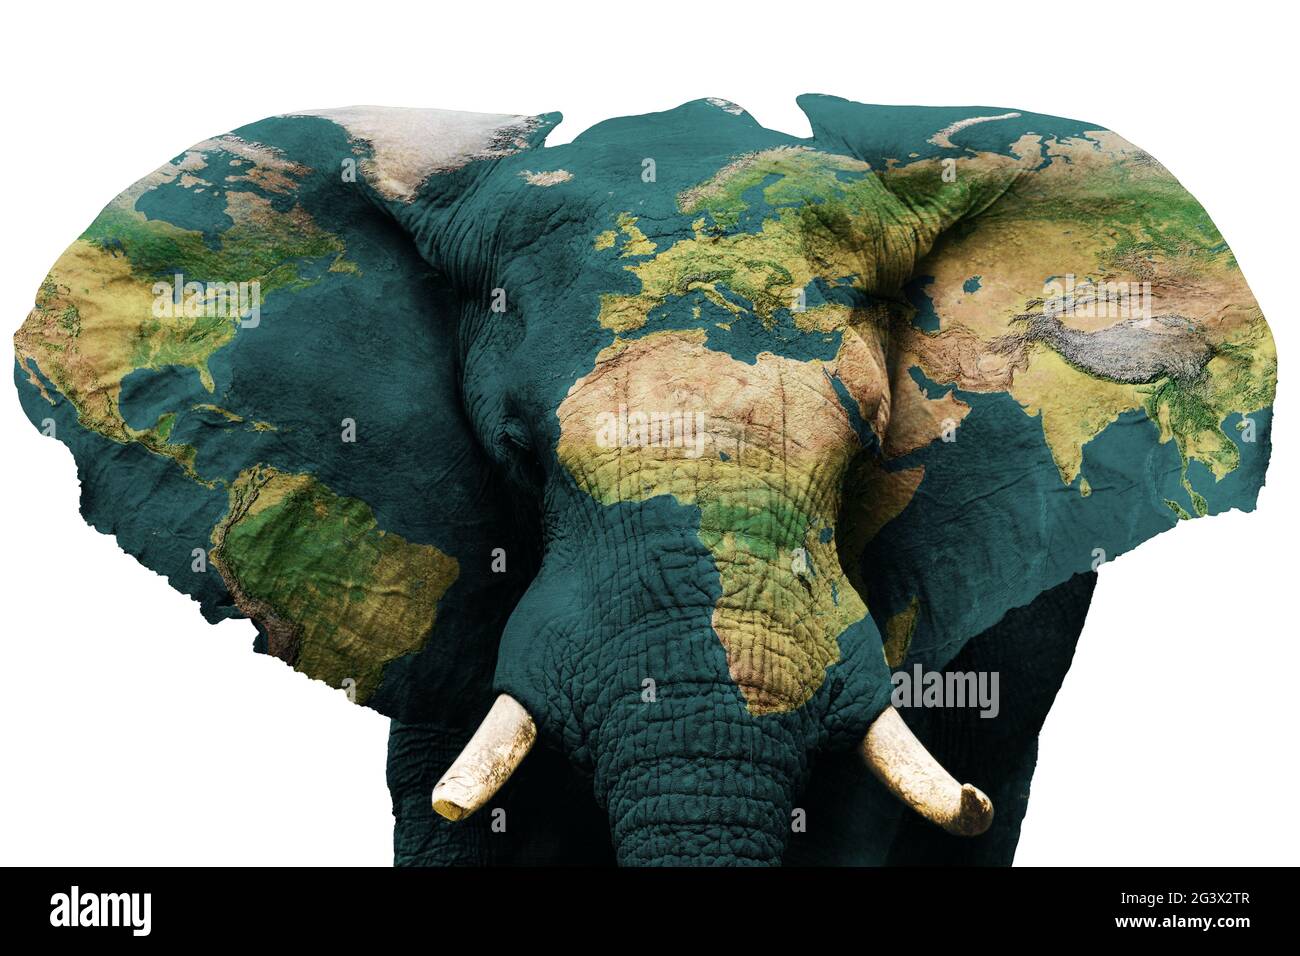 Isolated image of elephant with earth painted on skin. Stock Photo